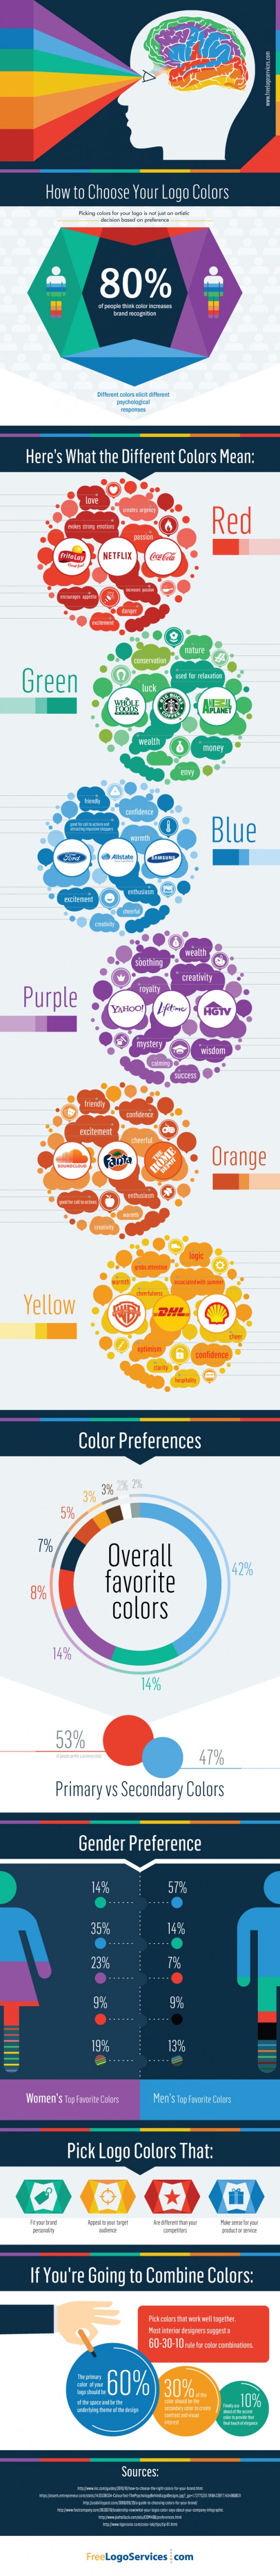 How to Choose Your Logo Colors